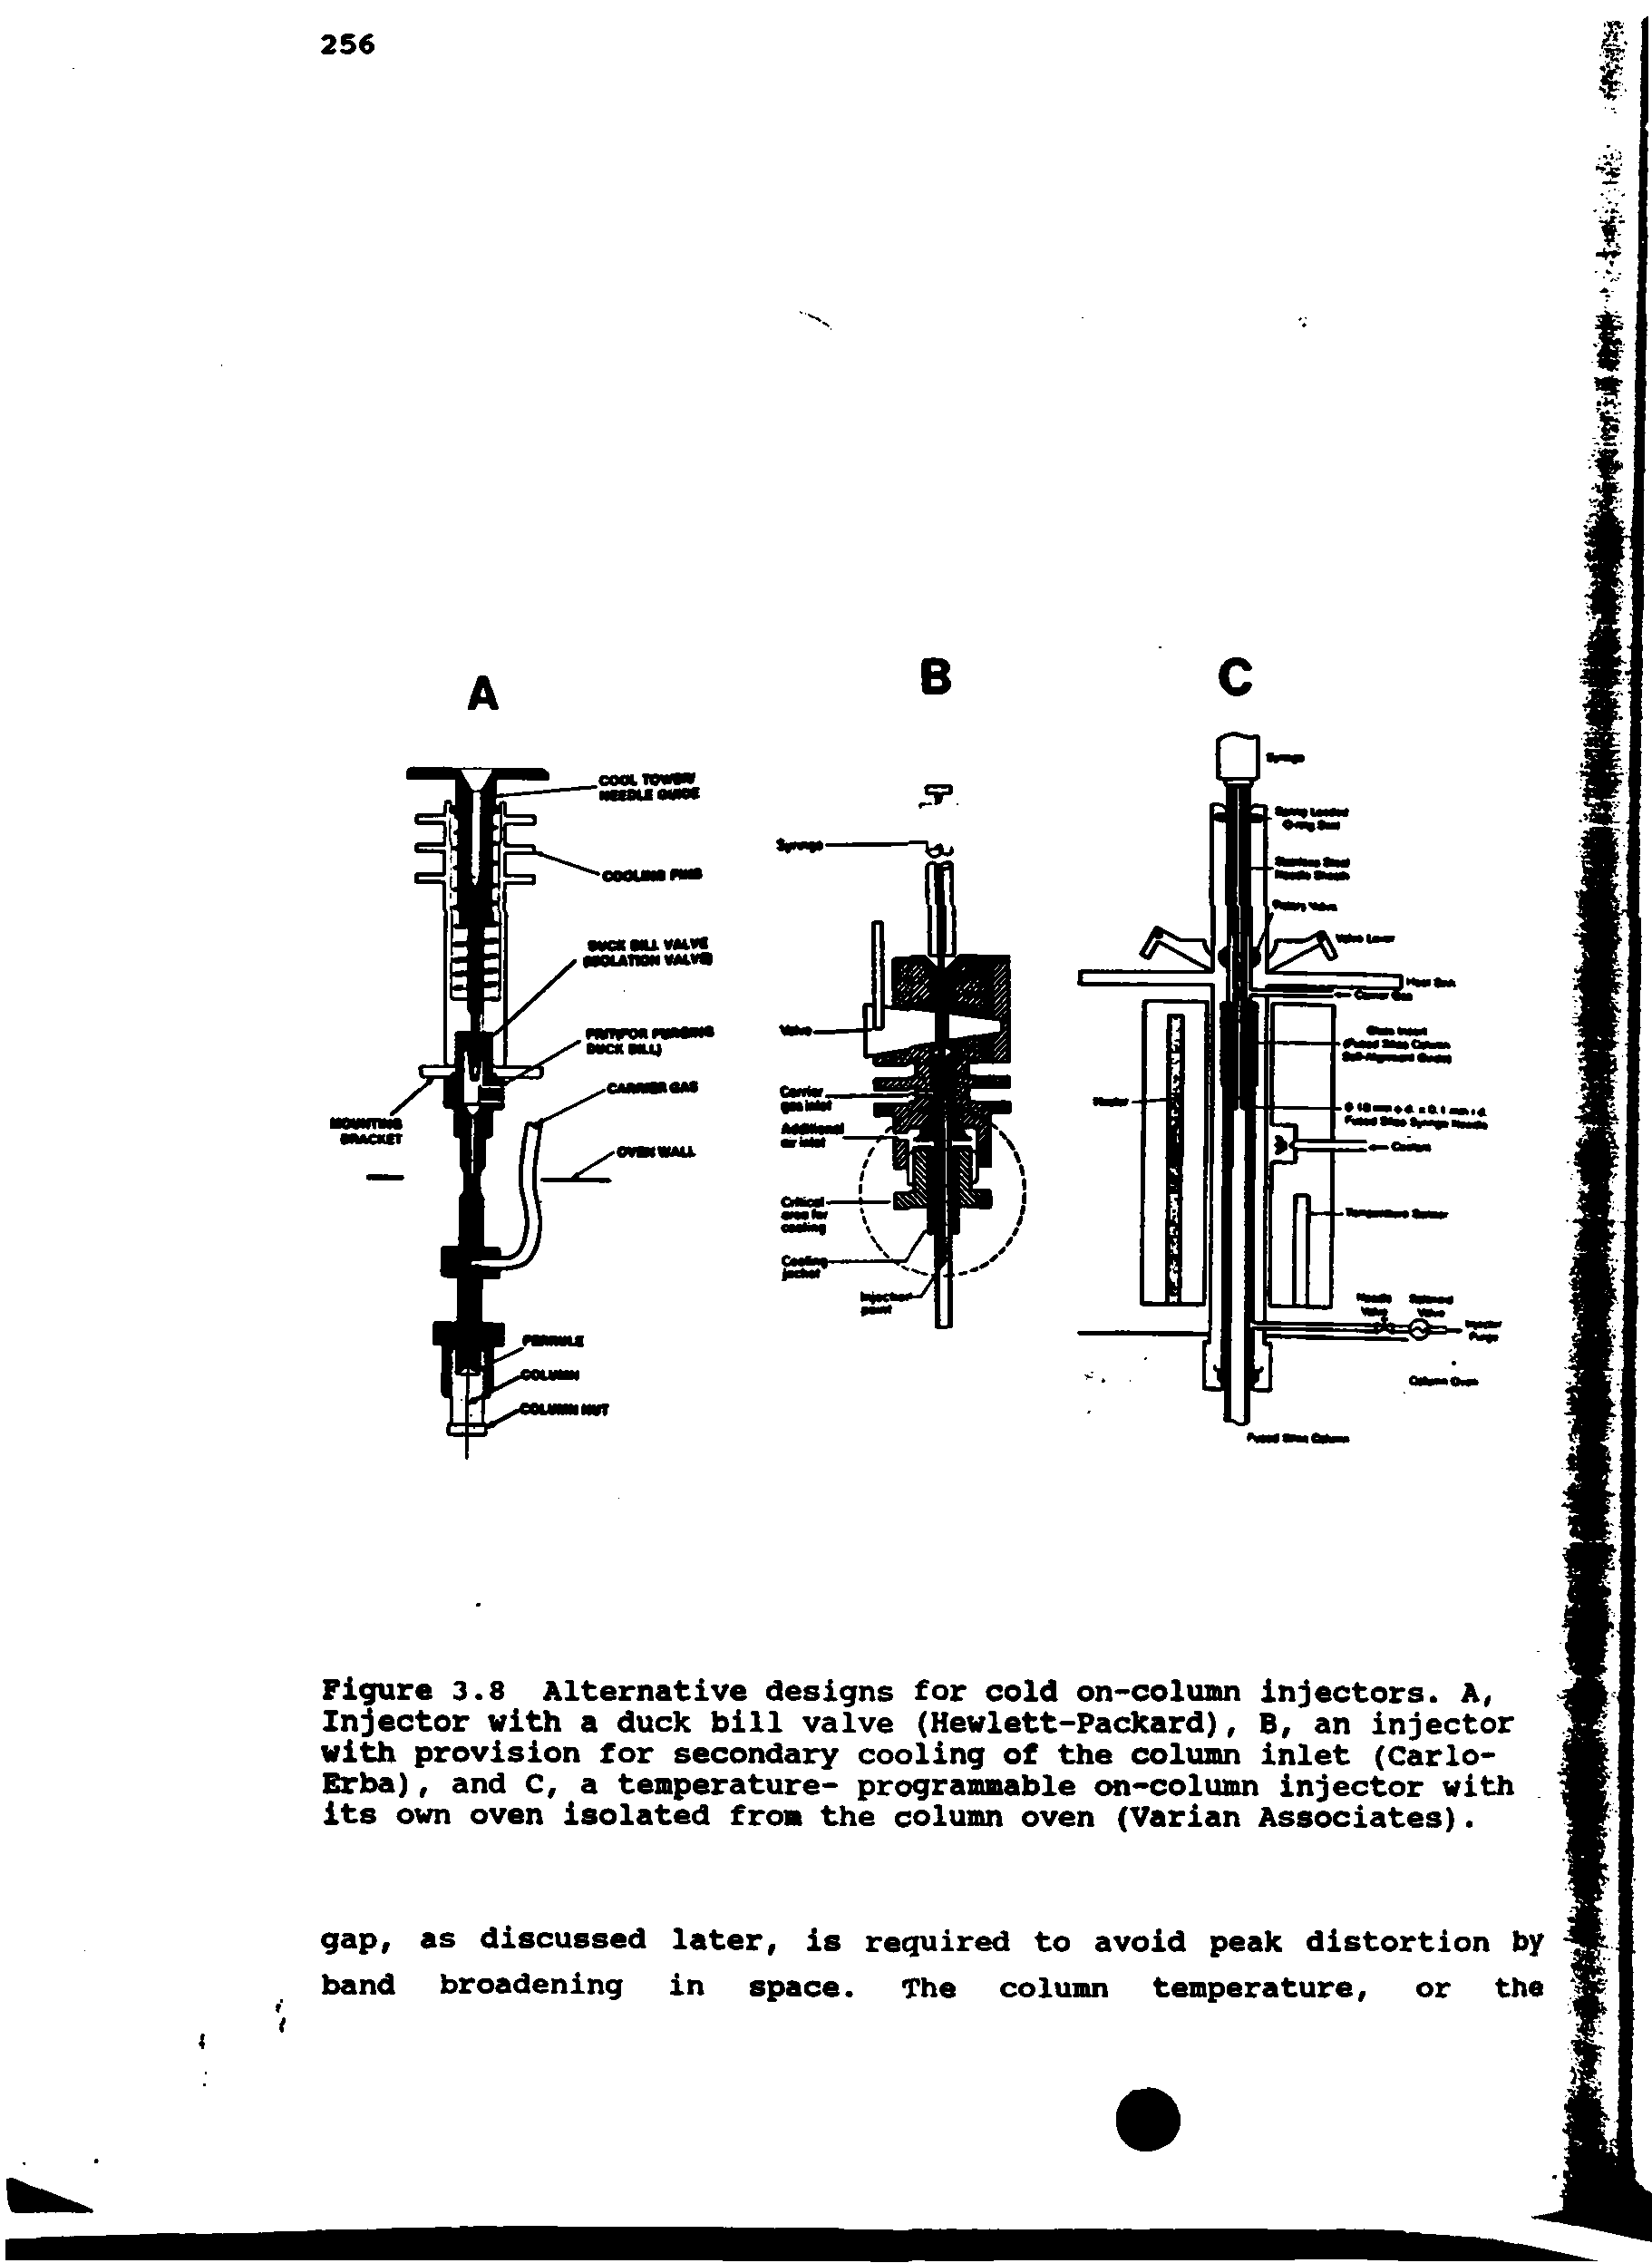 Figure 3.8 Alternative designs for cold on-column injectors, h, Injector with a duck bill valve (Hewlett-Packard), B, an injector with provision for secondary cooling of the column inlet (Carlo-Erba), and C, a temperature- programmable on-column injector with its own oven isolated from the column oven (Varian Associates).